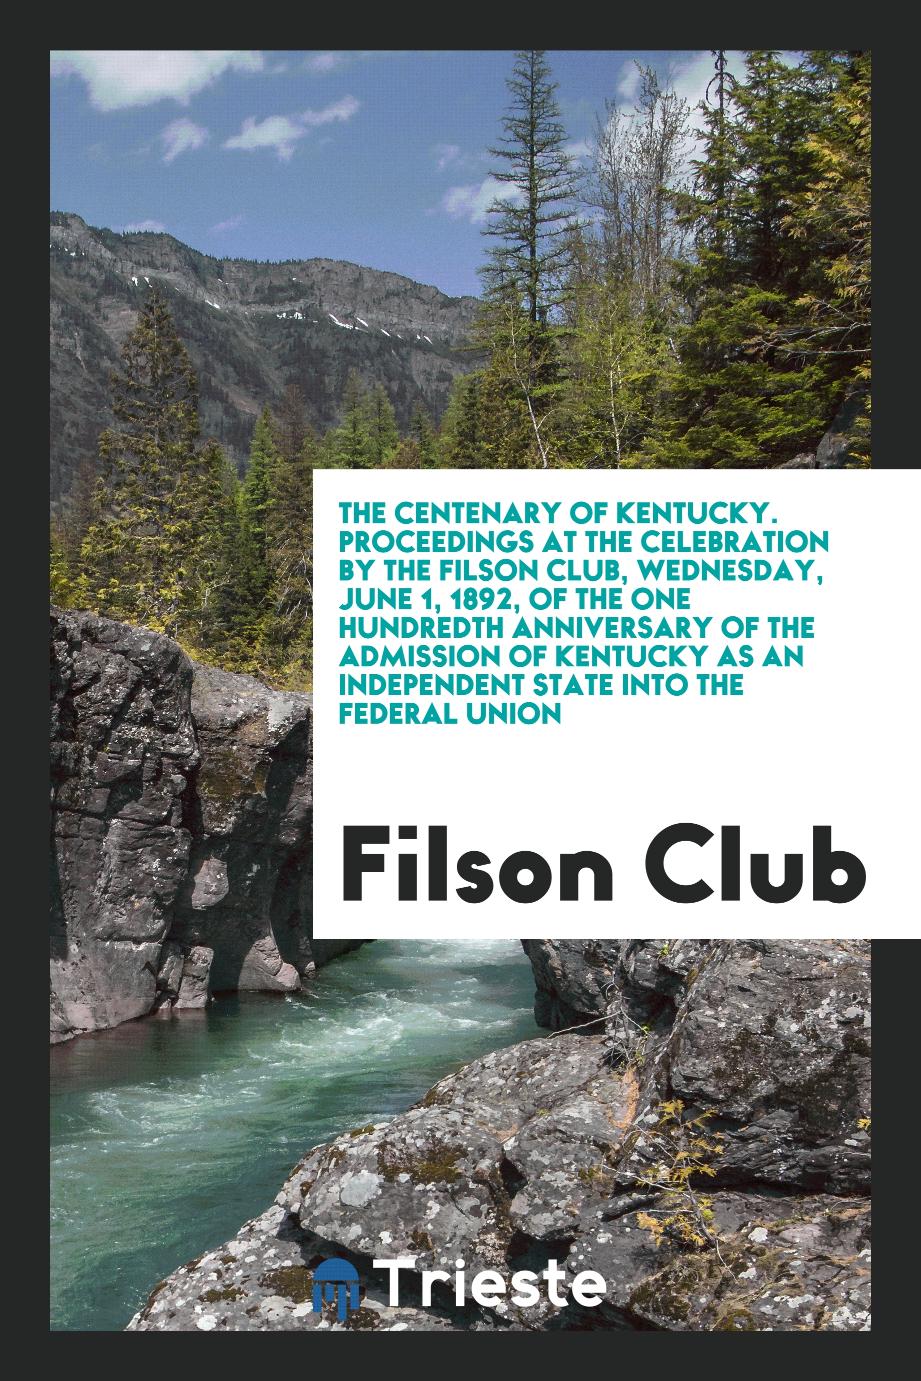 Filson Club - The Centenary of Kentucky. Proceedings at the Celebration by the Filson Club, Wednesday, June 1, 1892, of the One Hundredth Anniversary of the Admission of Kentucky as an Independent State into the Federal Union